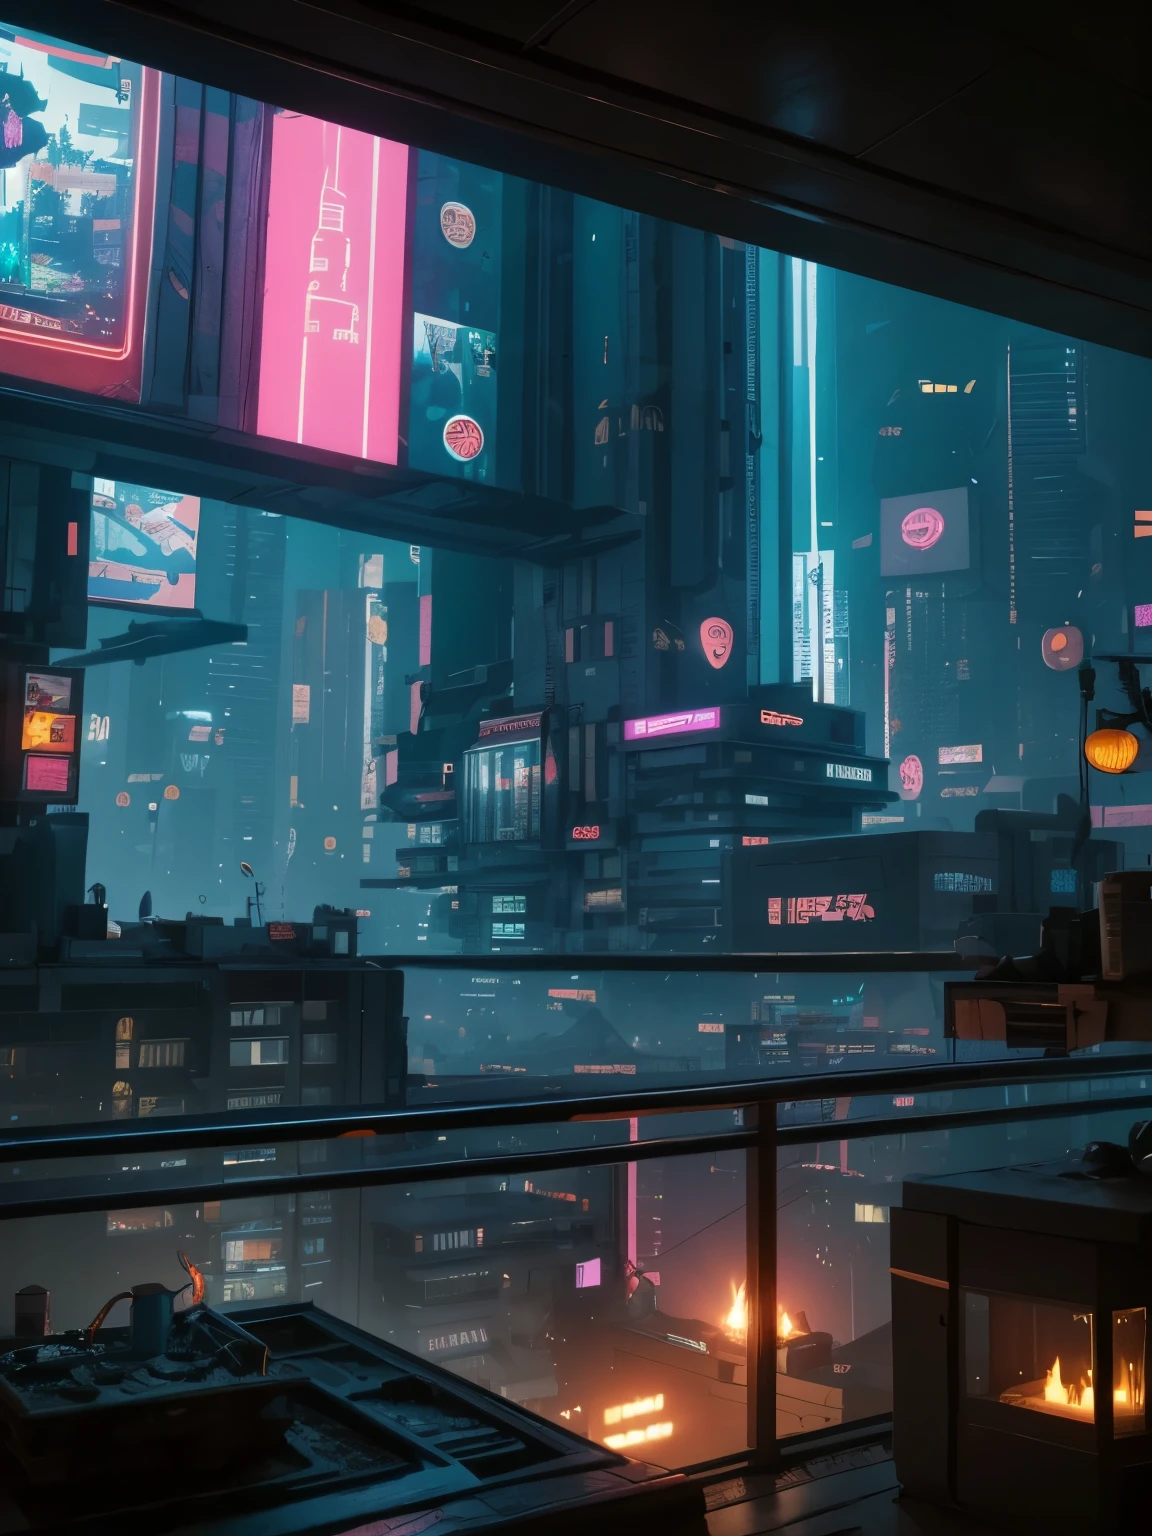 Generate a (cozy and peaceful interior) with a large window directly across from the camera. Through the window is a massive (((cyberpunk cityscape))) with (neon lights), highly detailed buildings, and colorful accents. The window and cityscape are important and should be focal points of the image. The room offers a sanctuary from the busy details of everyday life. This image should contrast quiet interiors with vibrant, busy, dynamic exteriors. Take inspiration from Kamen Nikolov's cyberpunk work on Artstation. Utilize trending art styles and dynamic lighting to create a ((masterpiece)). Include artful stacks of books and pillows and include gently glowing candles.